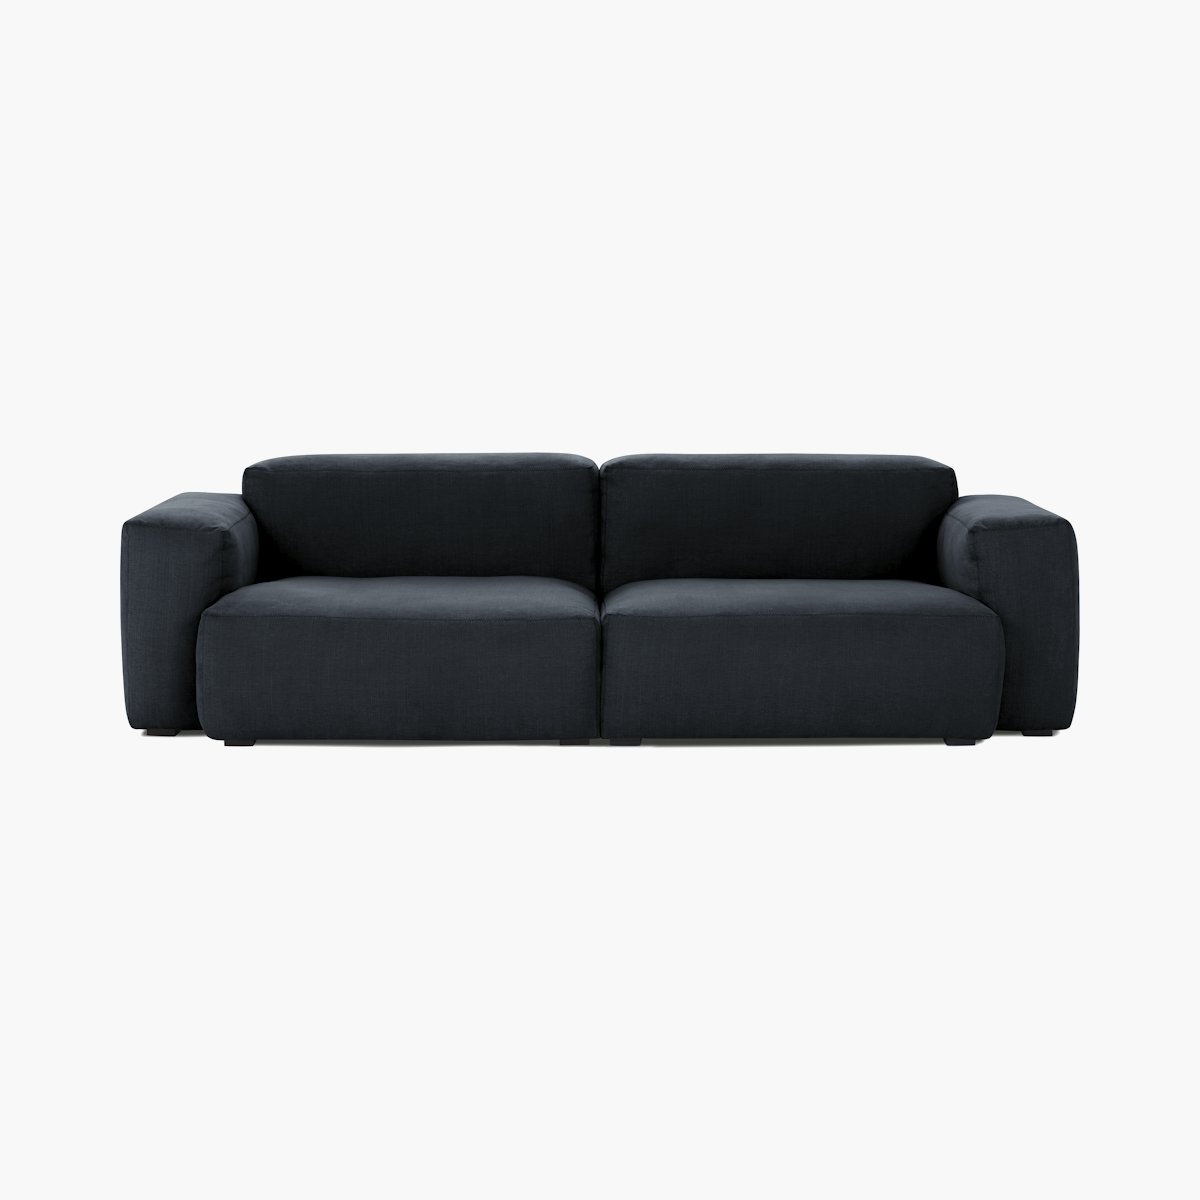 Mags Soft Low Sofa